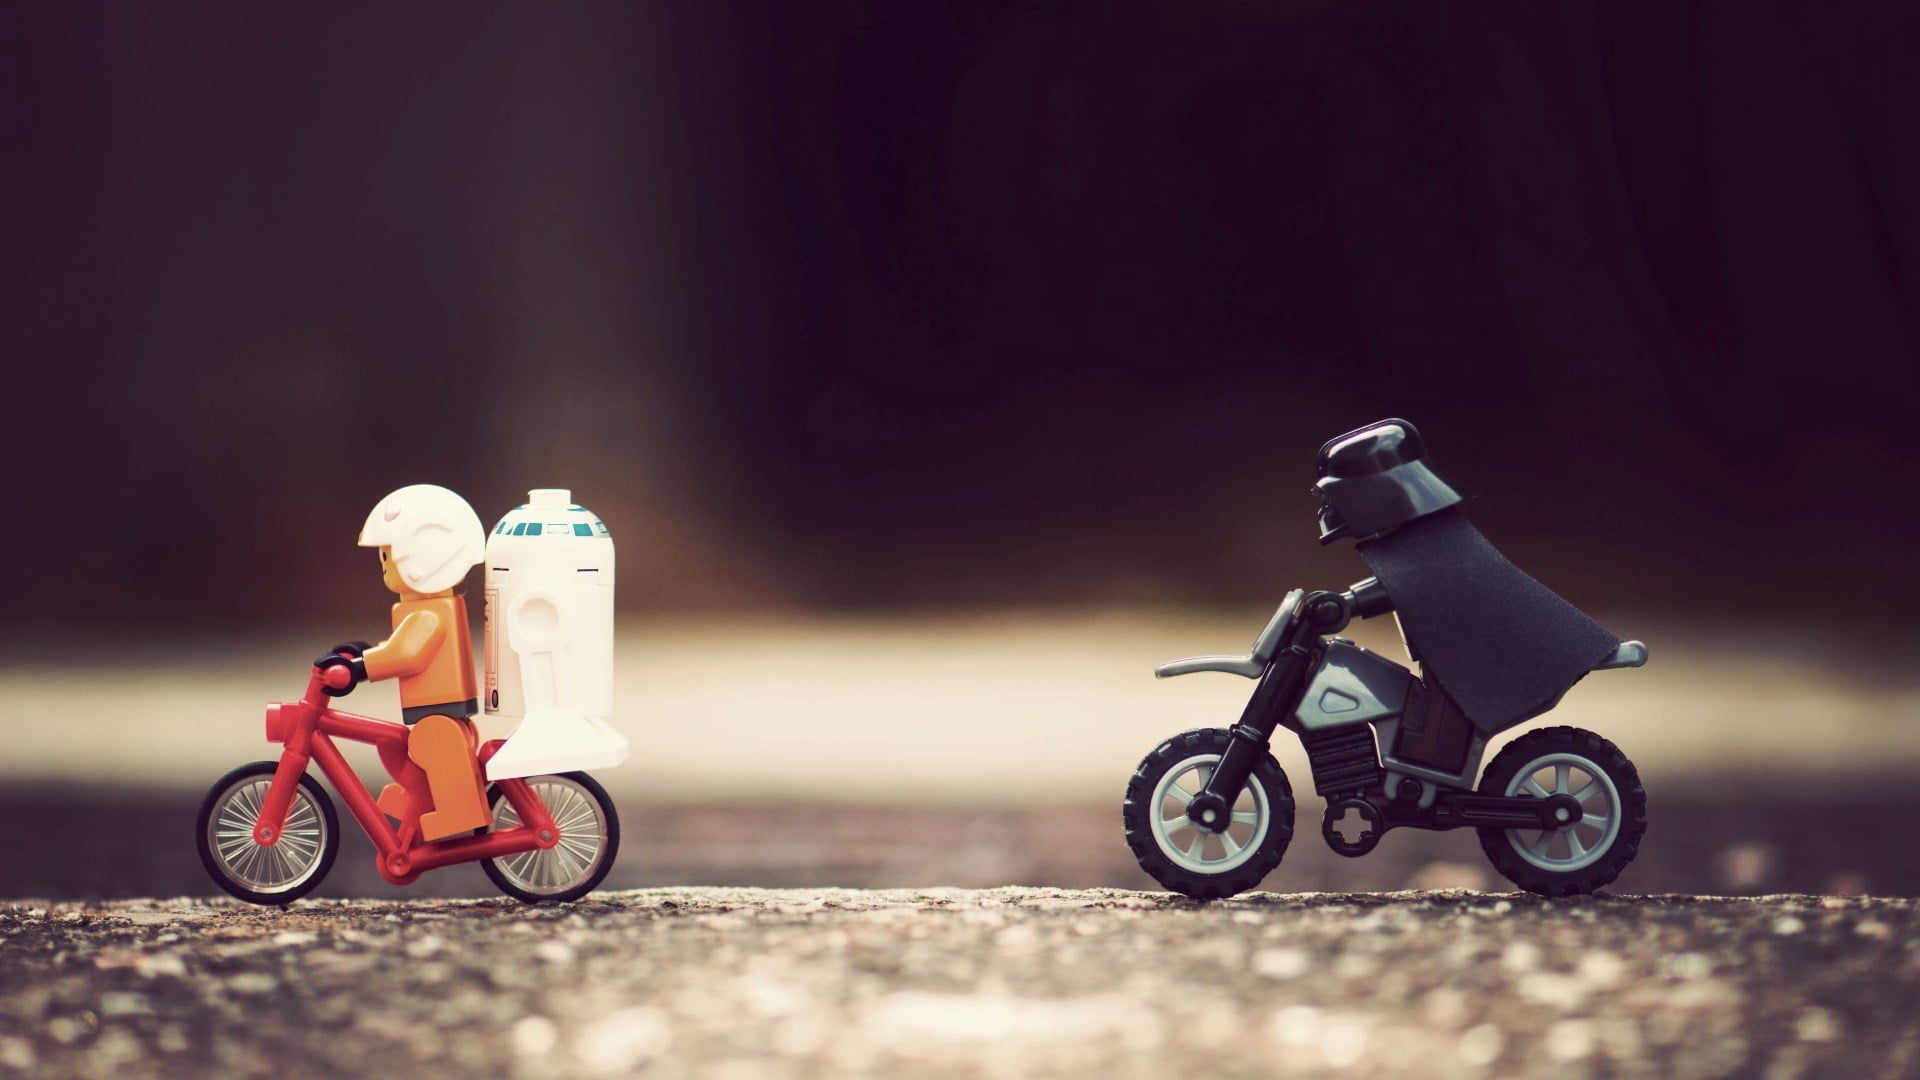 red and black bicycle and motorcycle toys, Star Wars, LEGO, Darth Vader